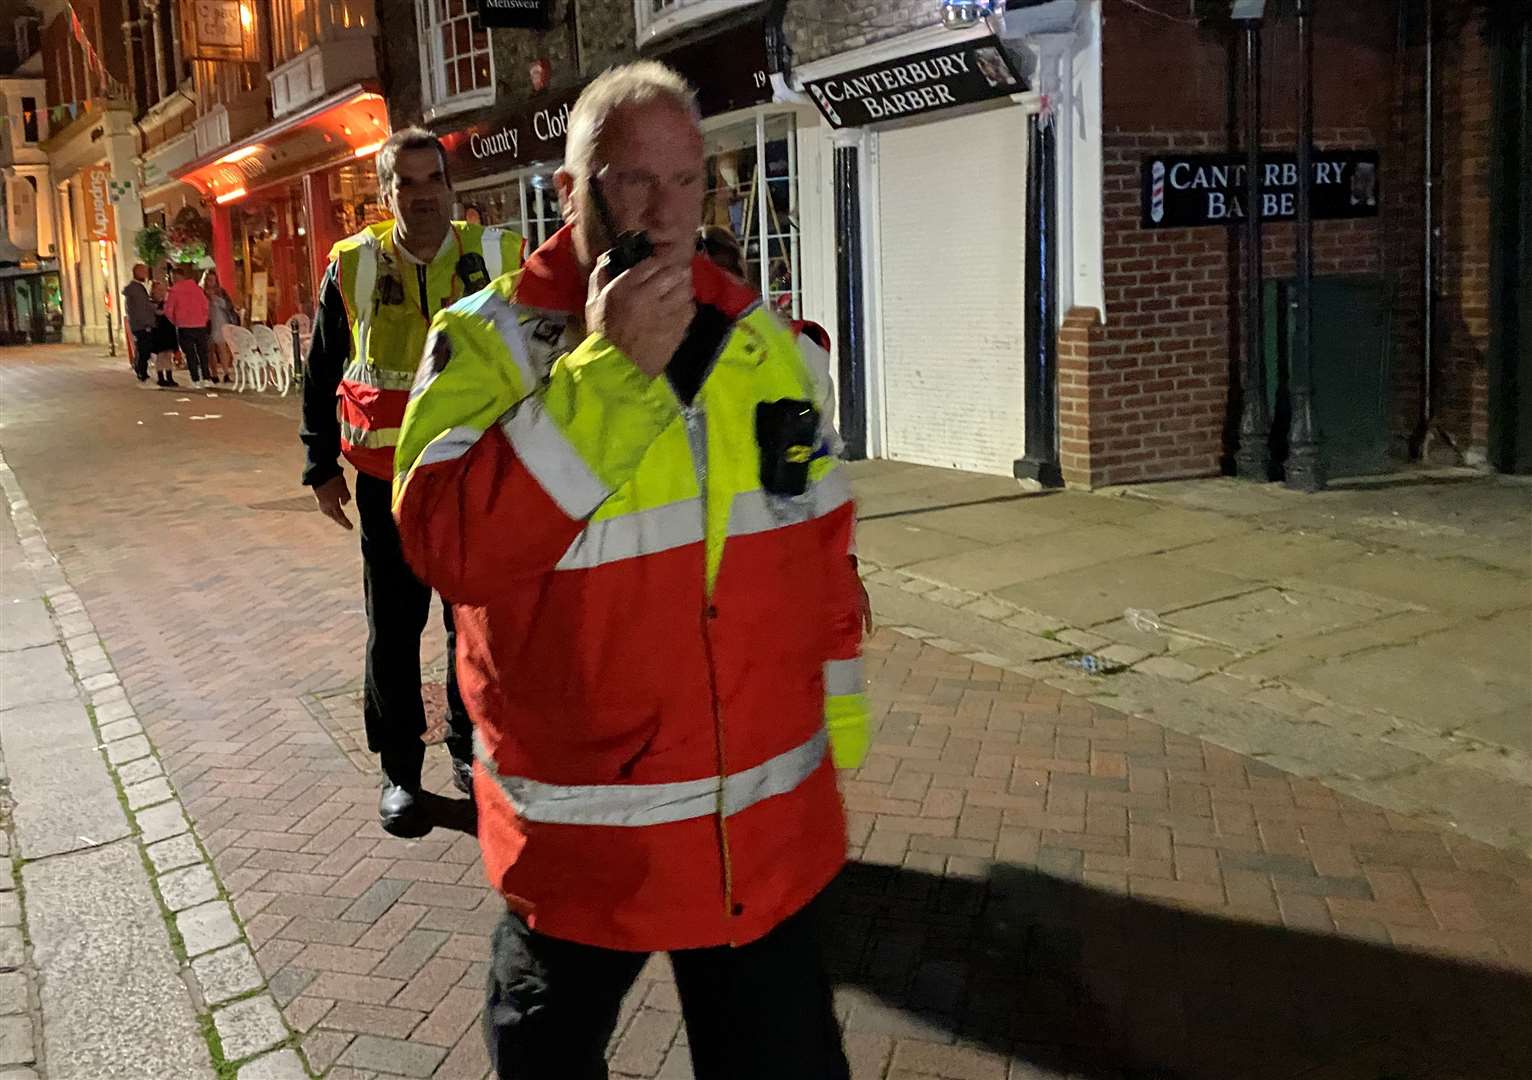 David Turner has been patrolling with the street marshals in Canterbury for four years